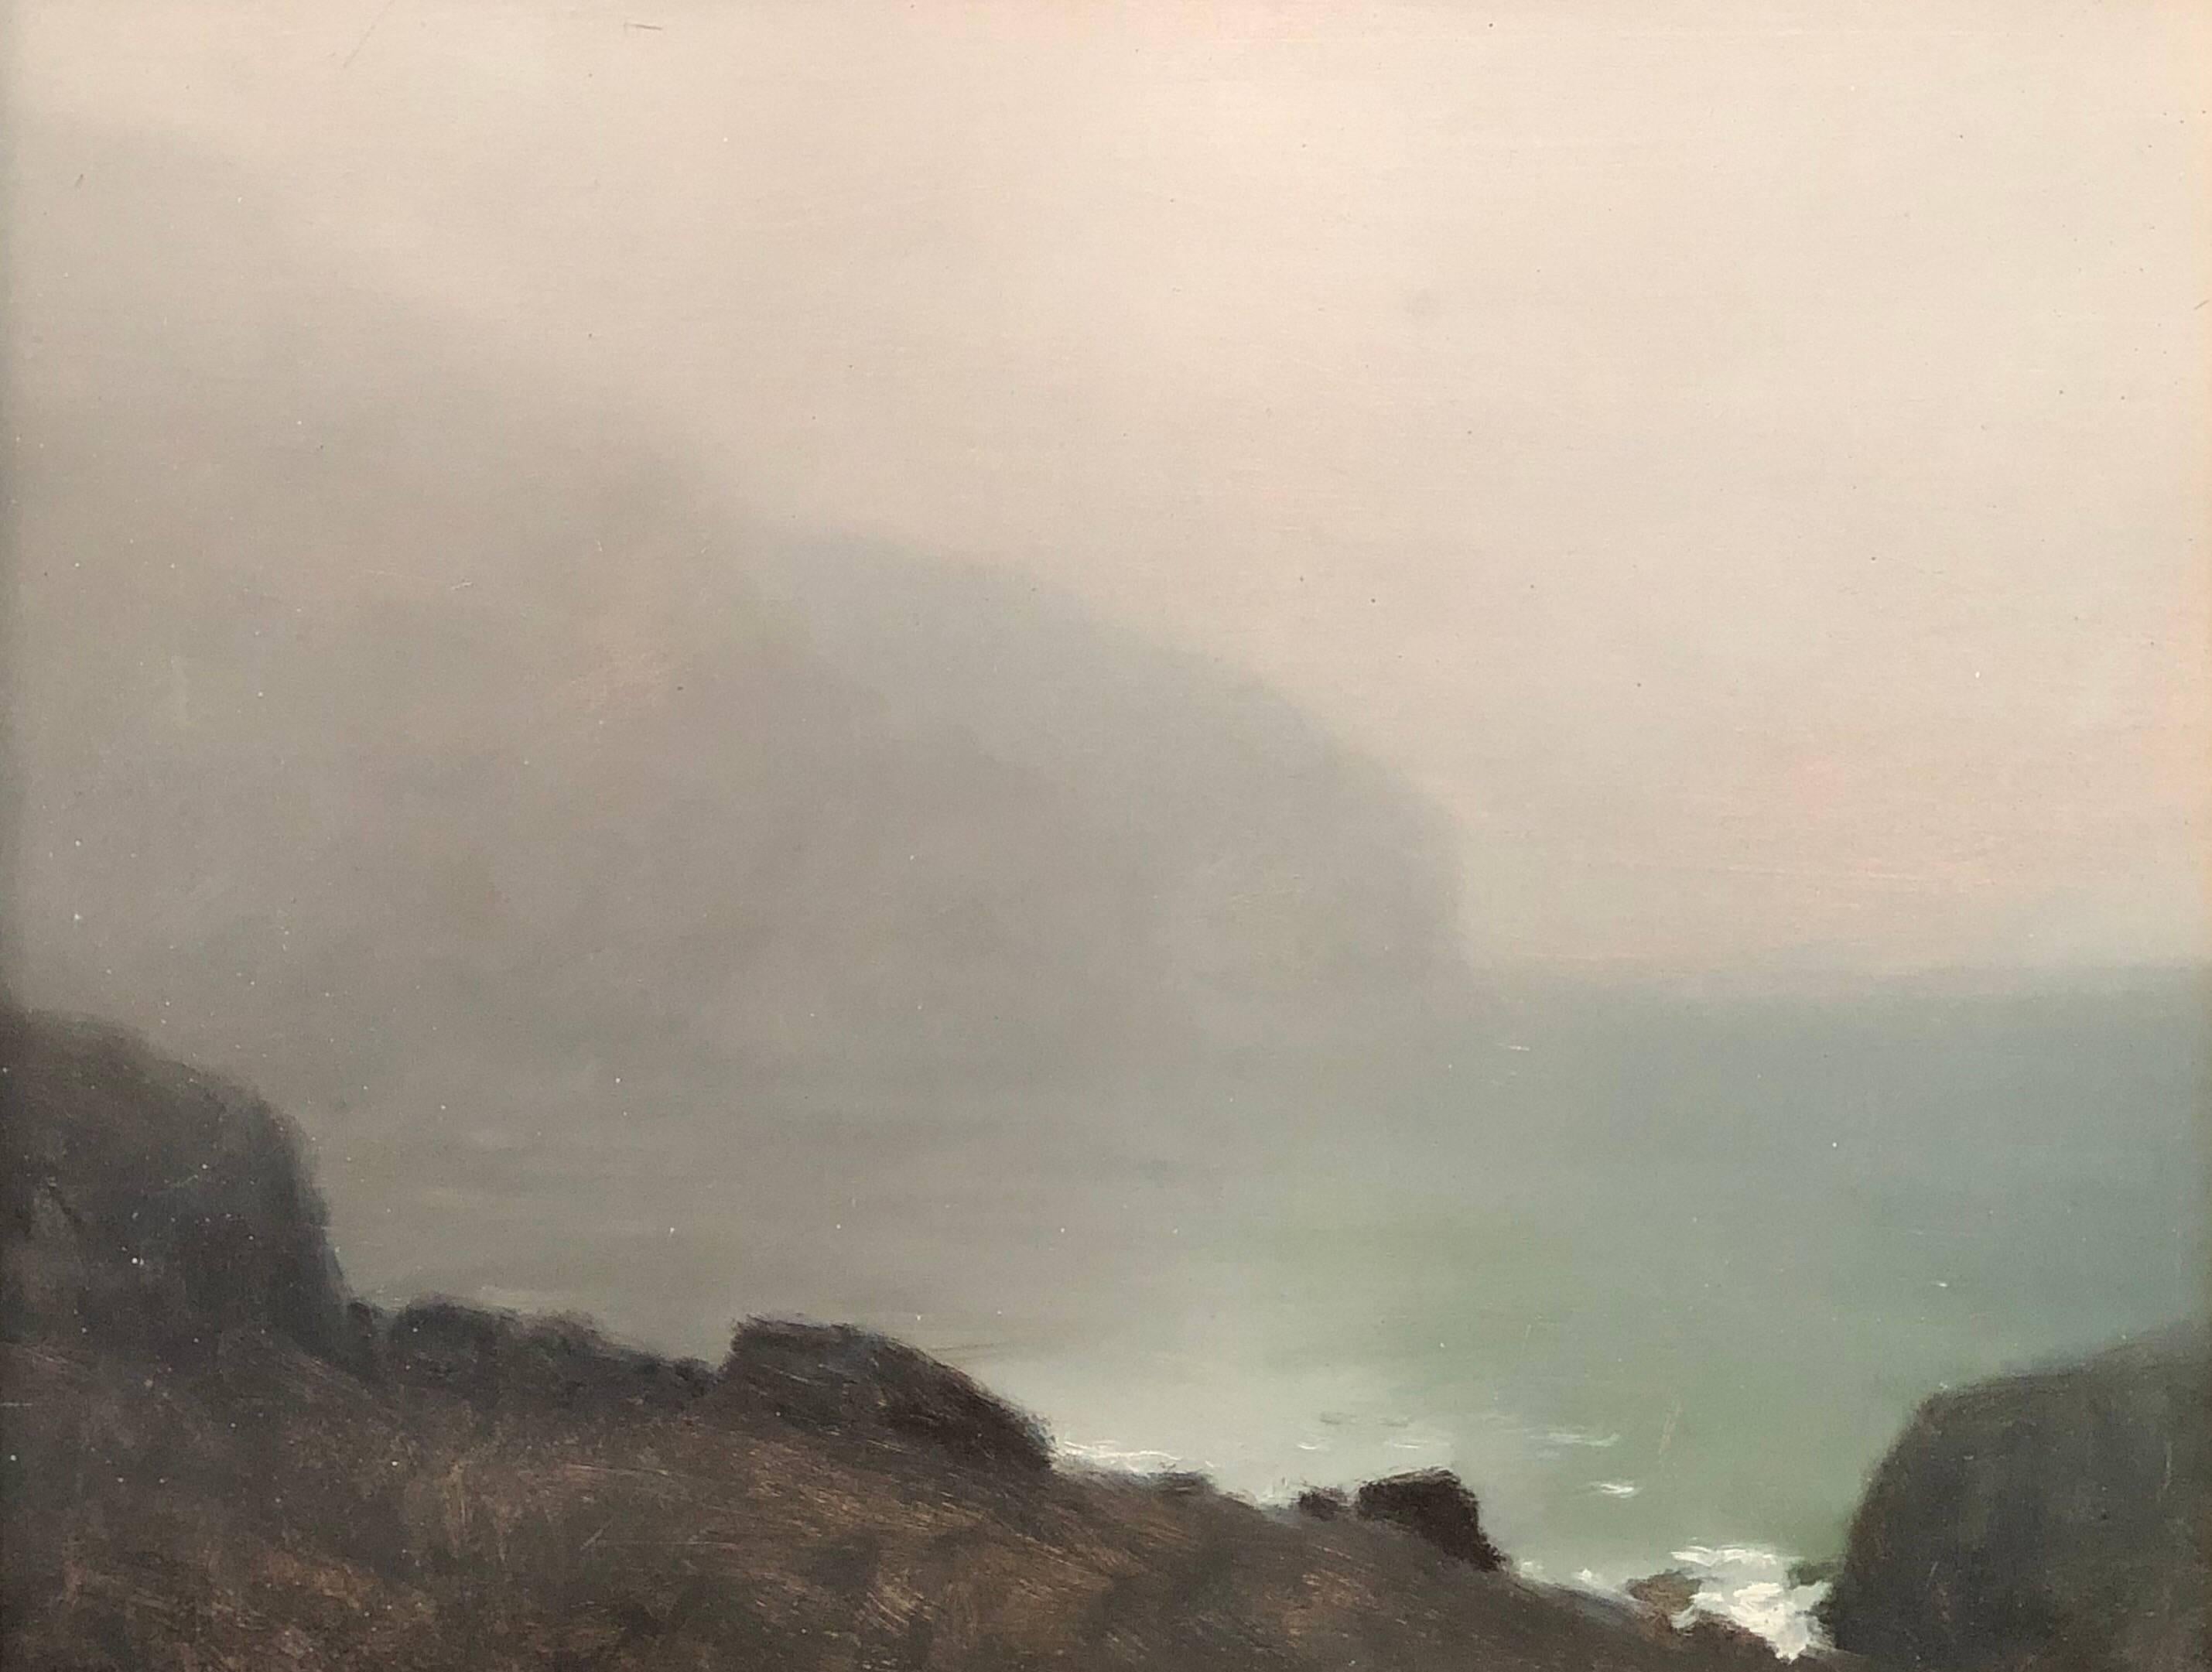 Donald Jurney Landscape Painting - A Study in Fog